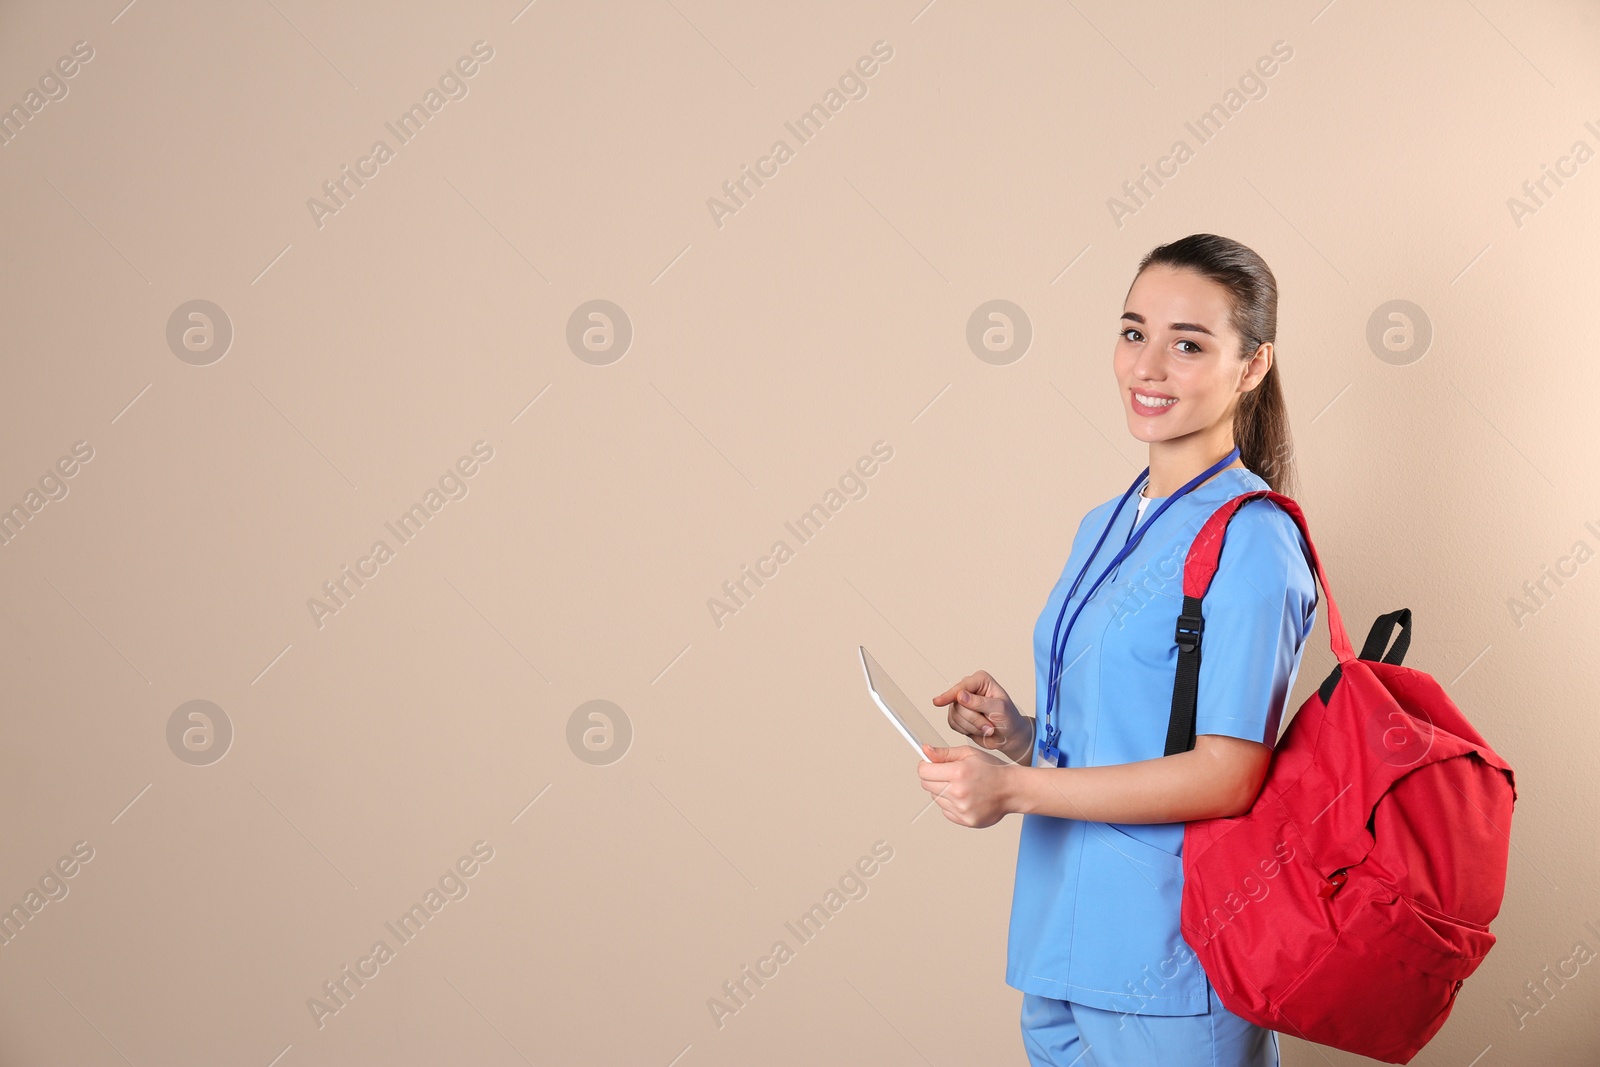 Photo of Young medical student with tablet and backpack on color background. Space for text